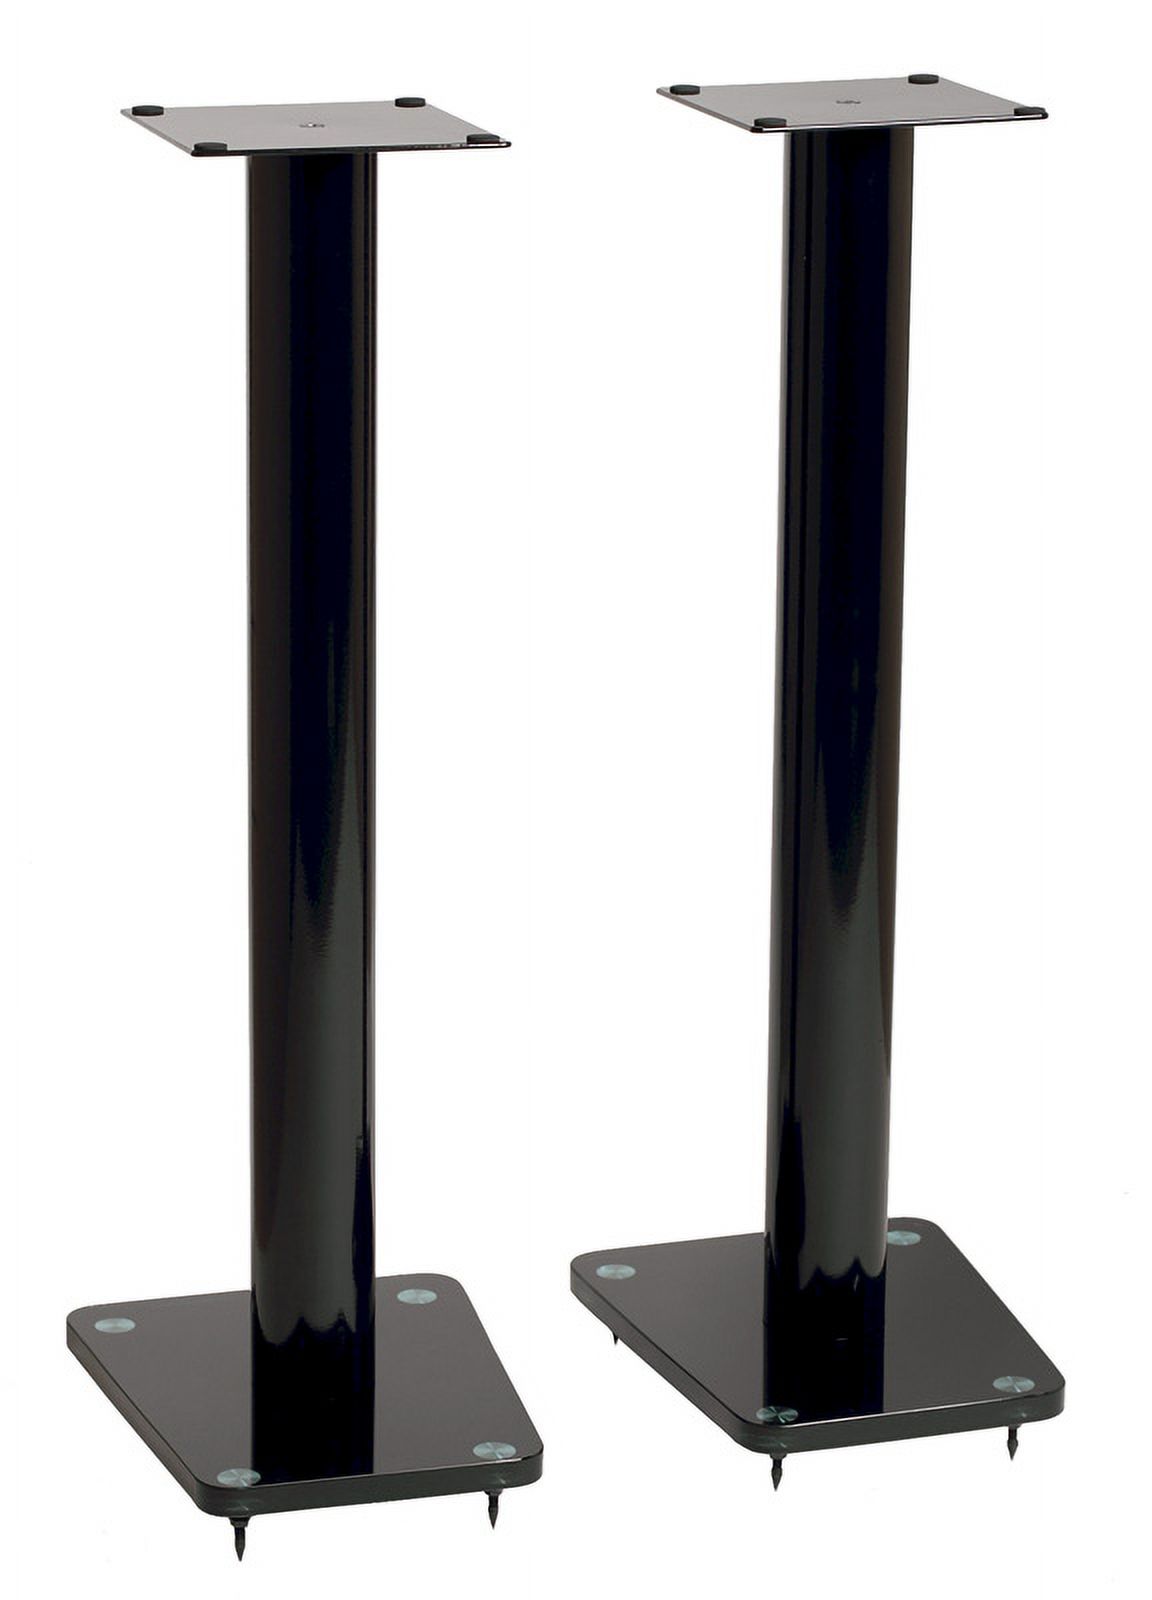 32" Tempered glass & metal speaker stand in Gloss Black finish. Sold as pair - image 2 of 2